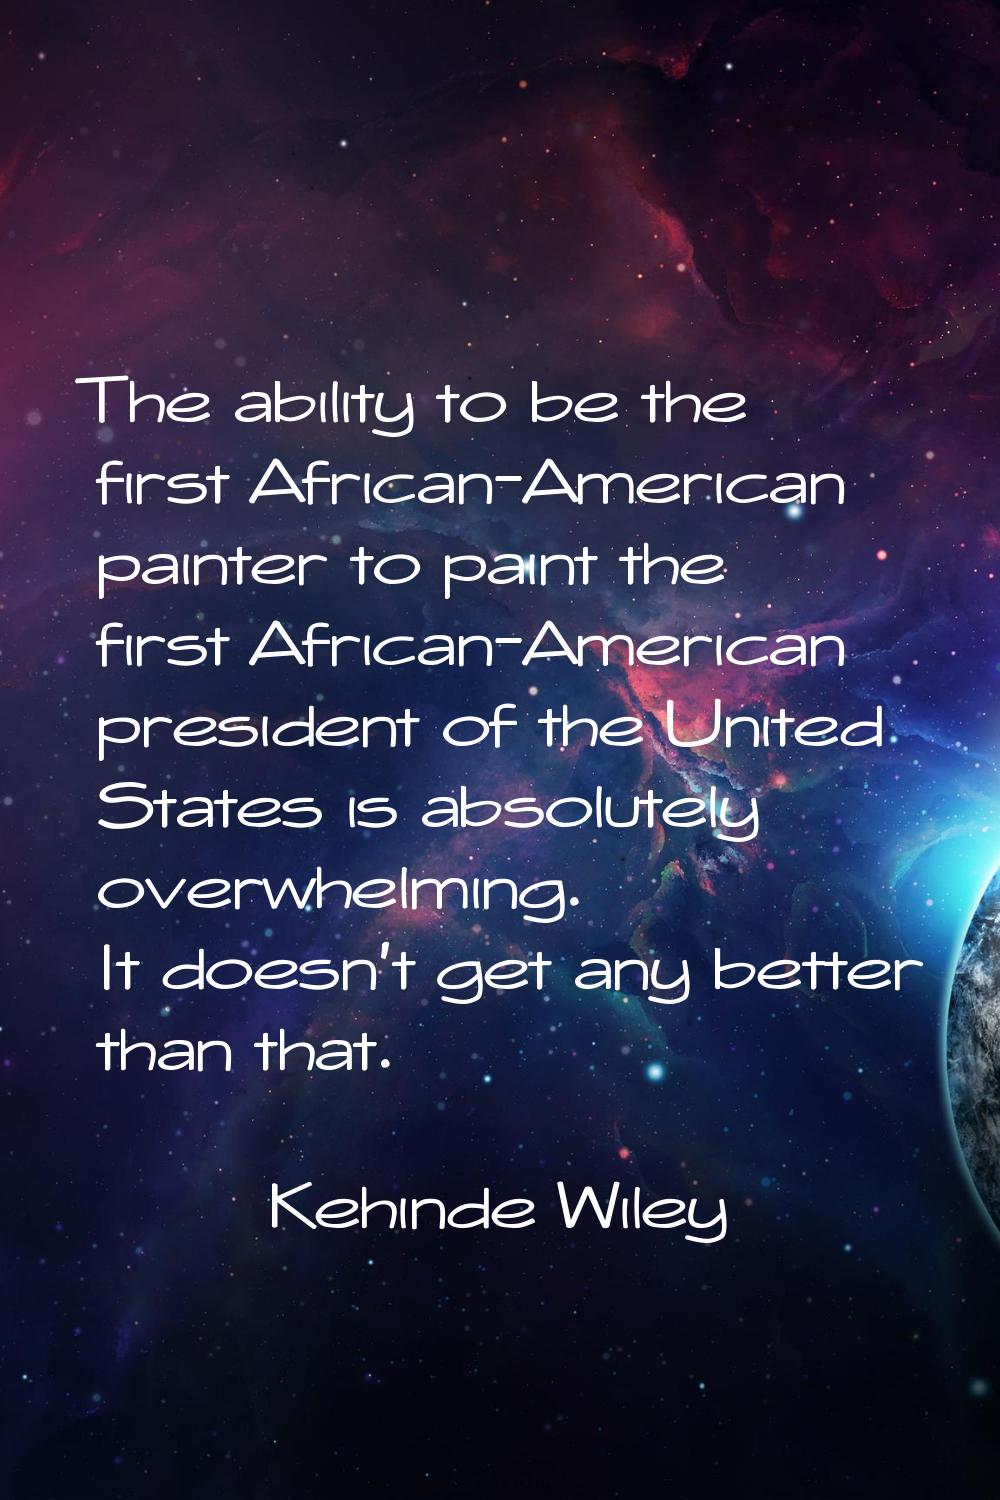 The ability to be the first African-American painter to paint the first African-American president 